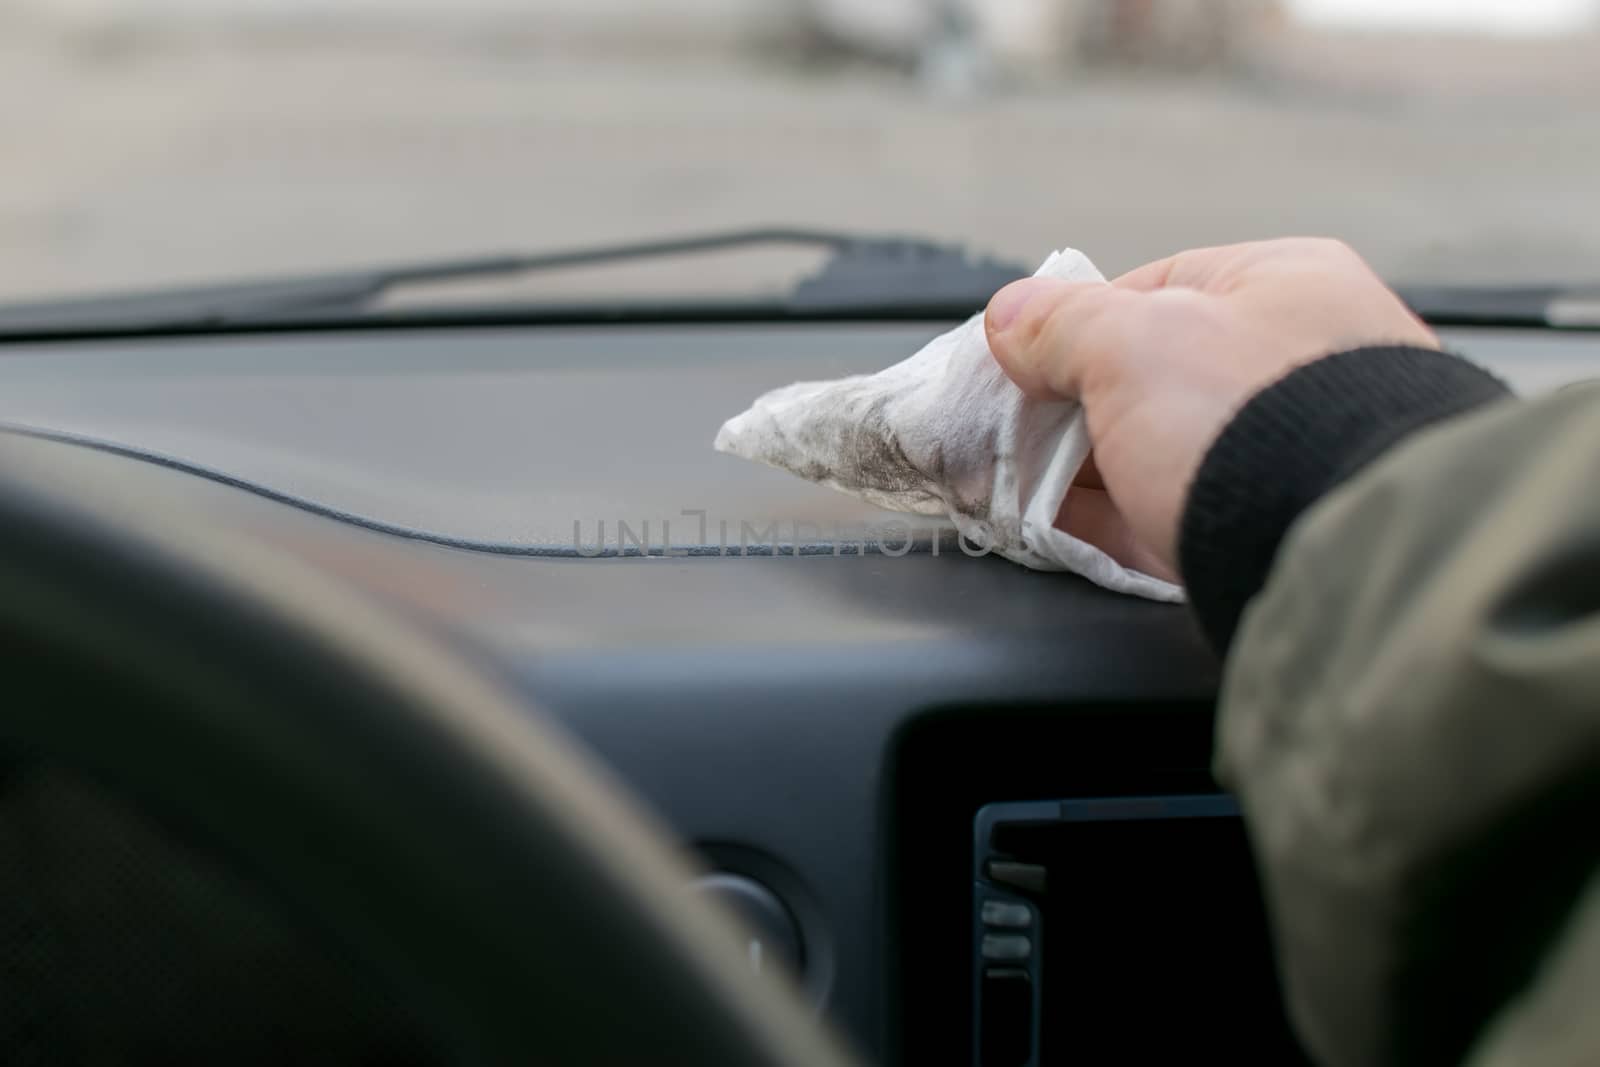 hand of people clean cloth car dashboard, of the car by jk3030